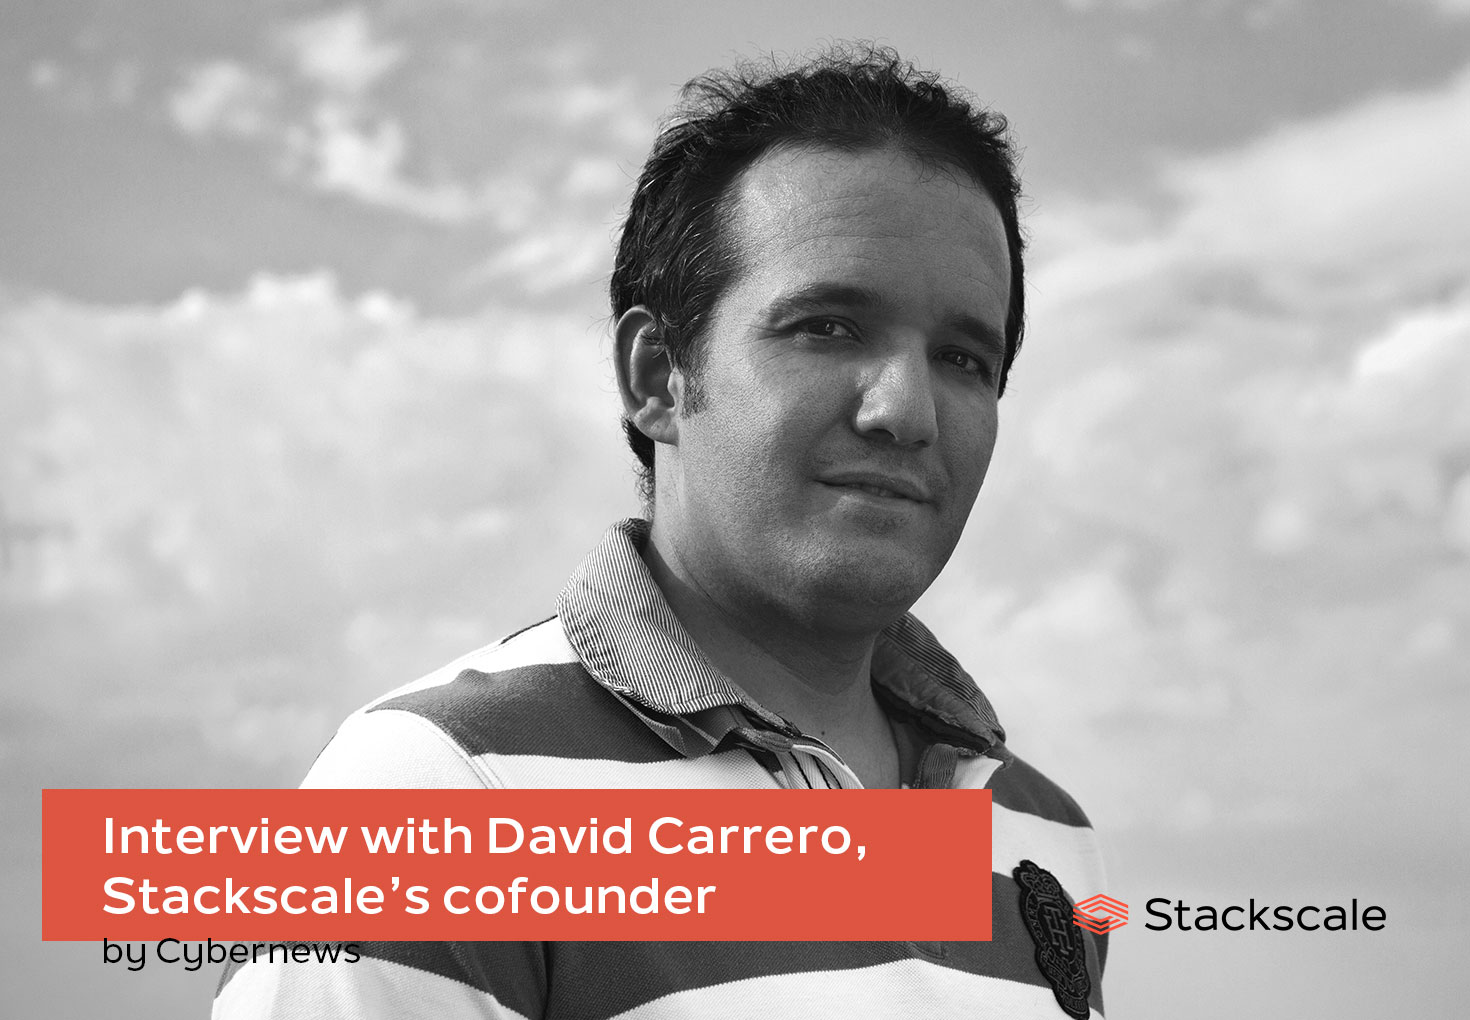 Interview with Stackscale's cofounder, David Carrero